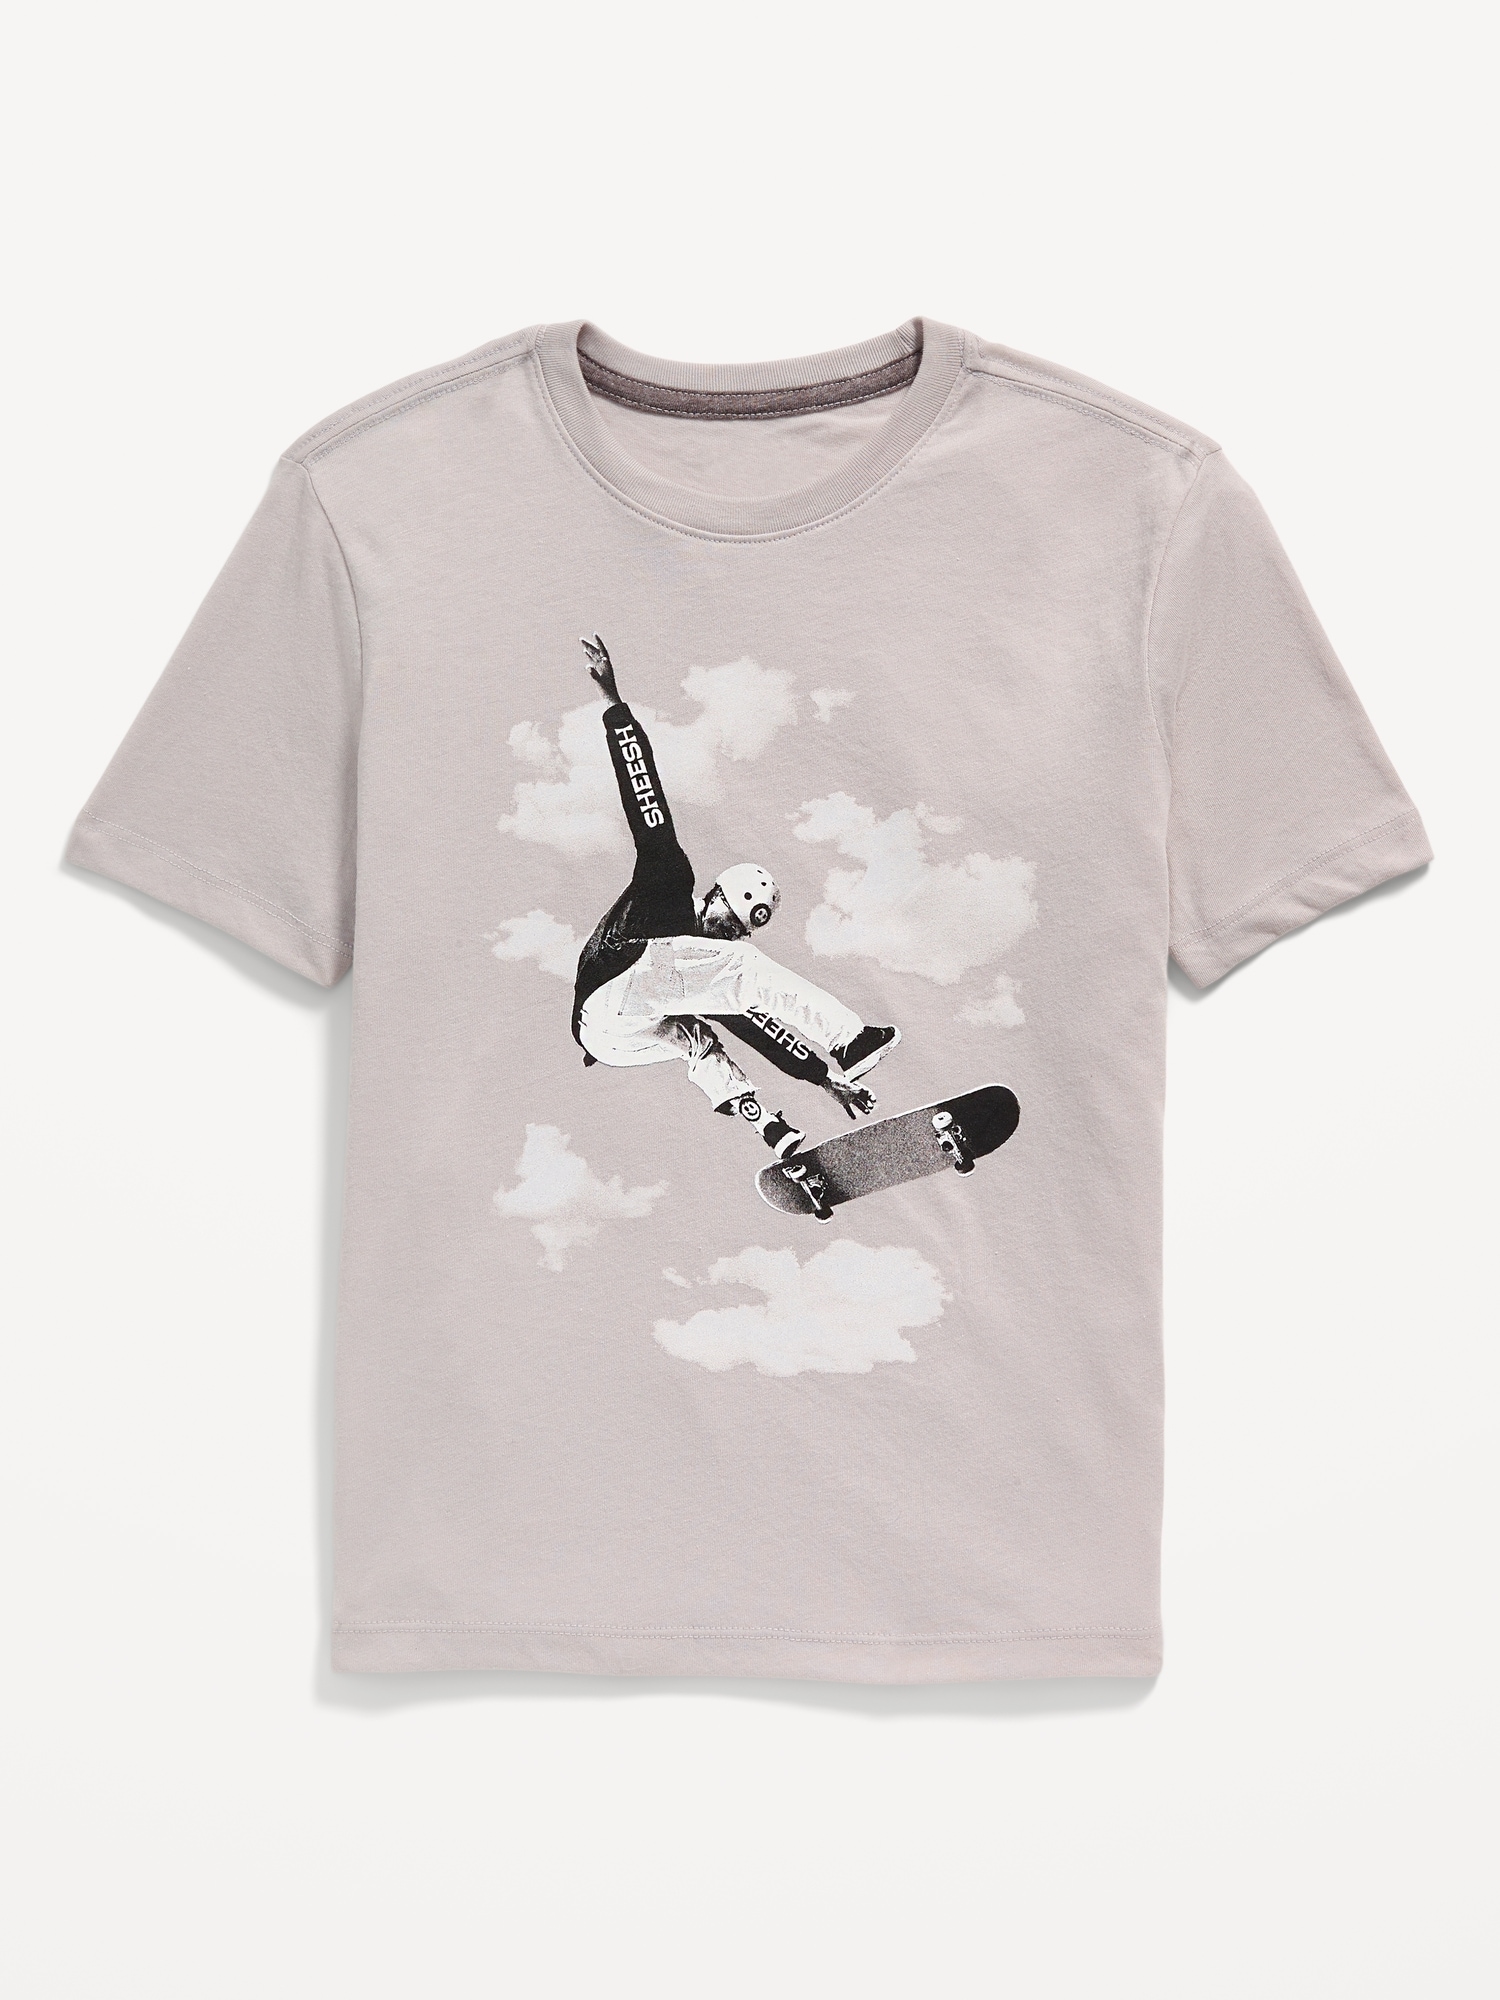 Short-Sleeve Graphic T-Shirt for Boys Hot Deal